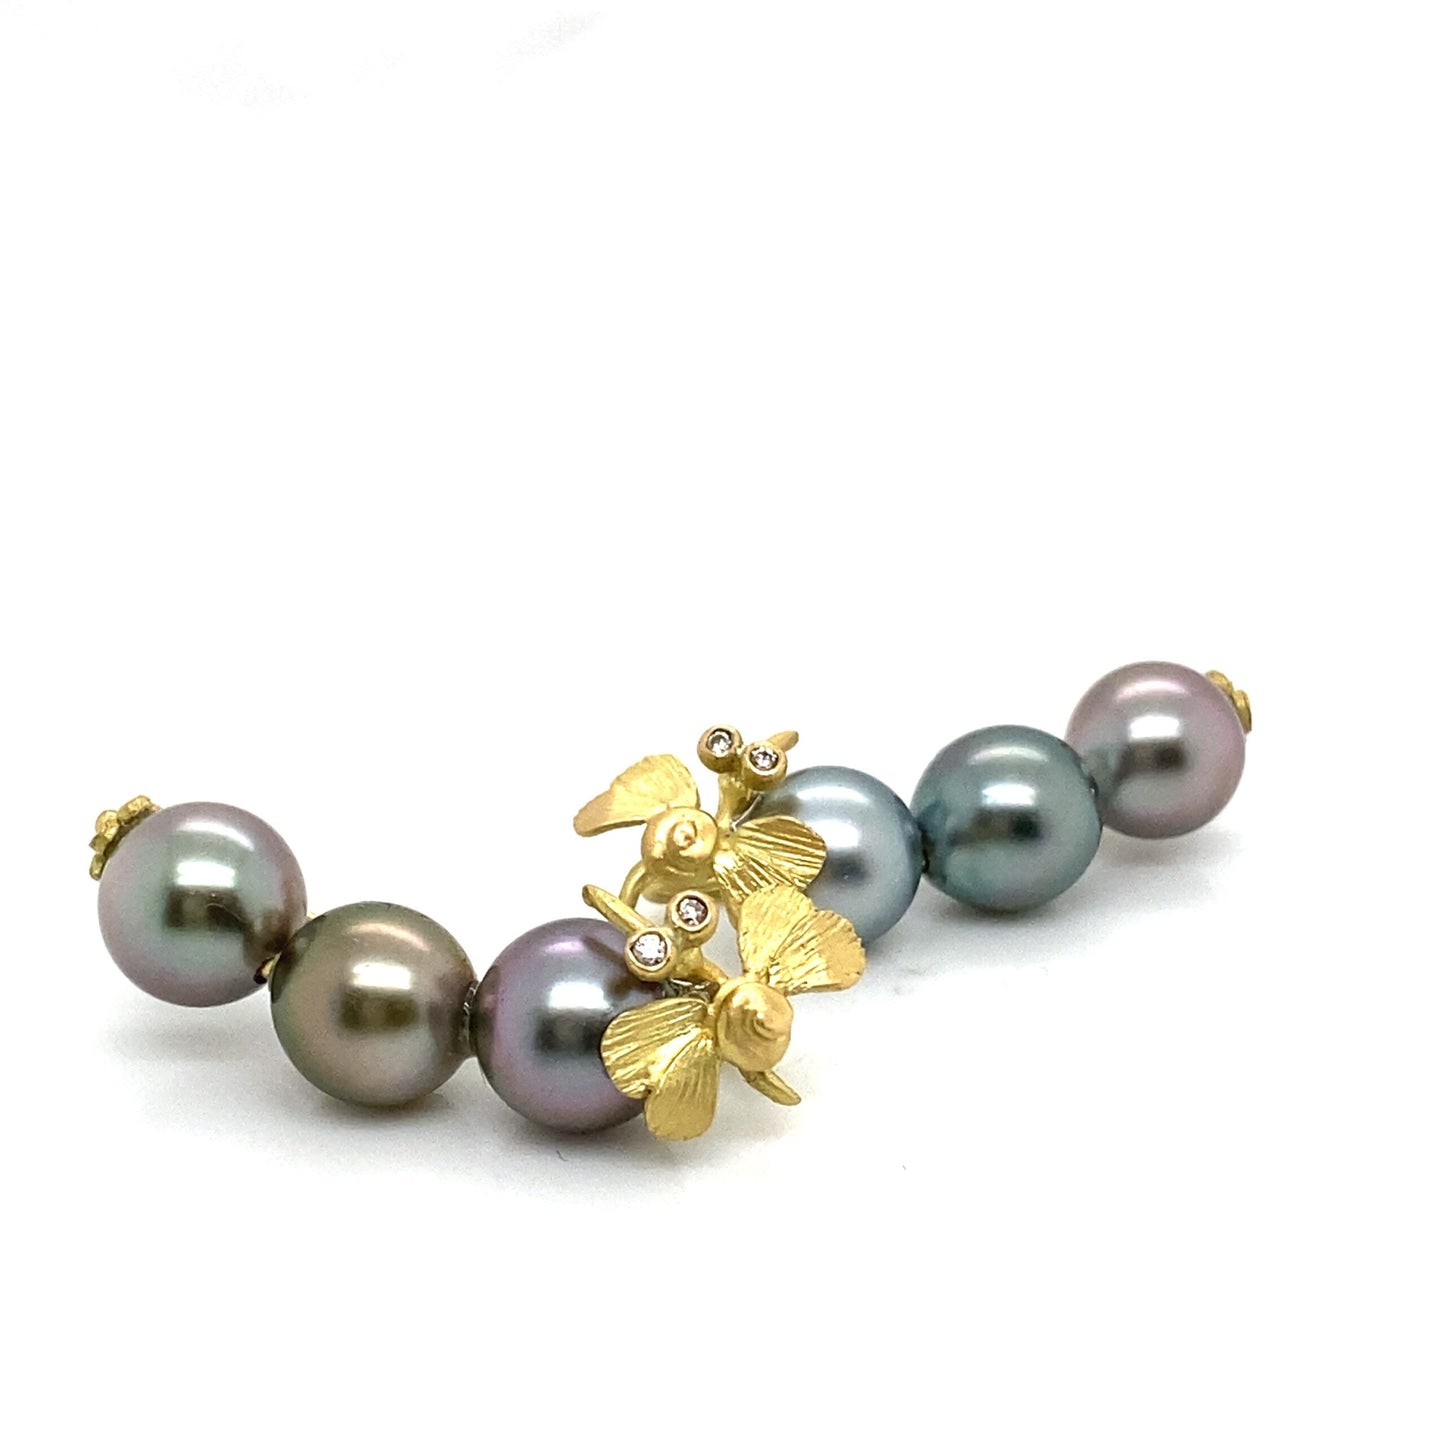 18K Gold Earrings with Tahiti Pearls and White Diamonds